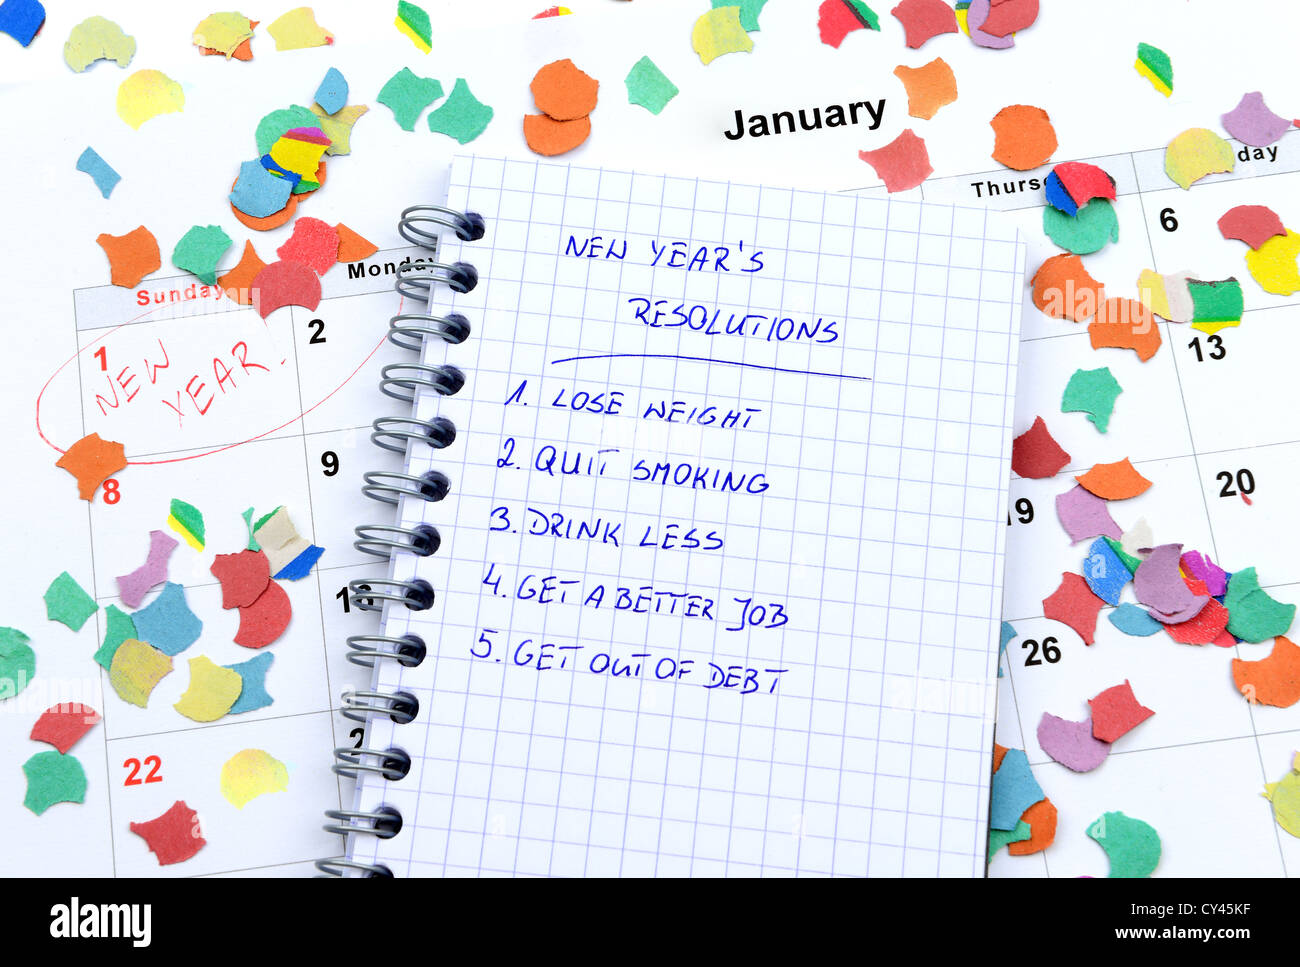 New Year's resolutions listed in circle notepad Stock Photo